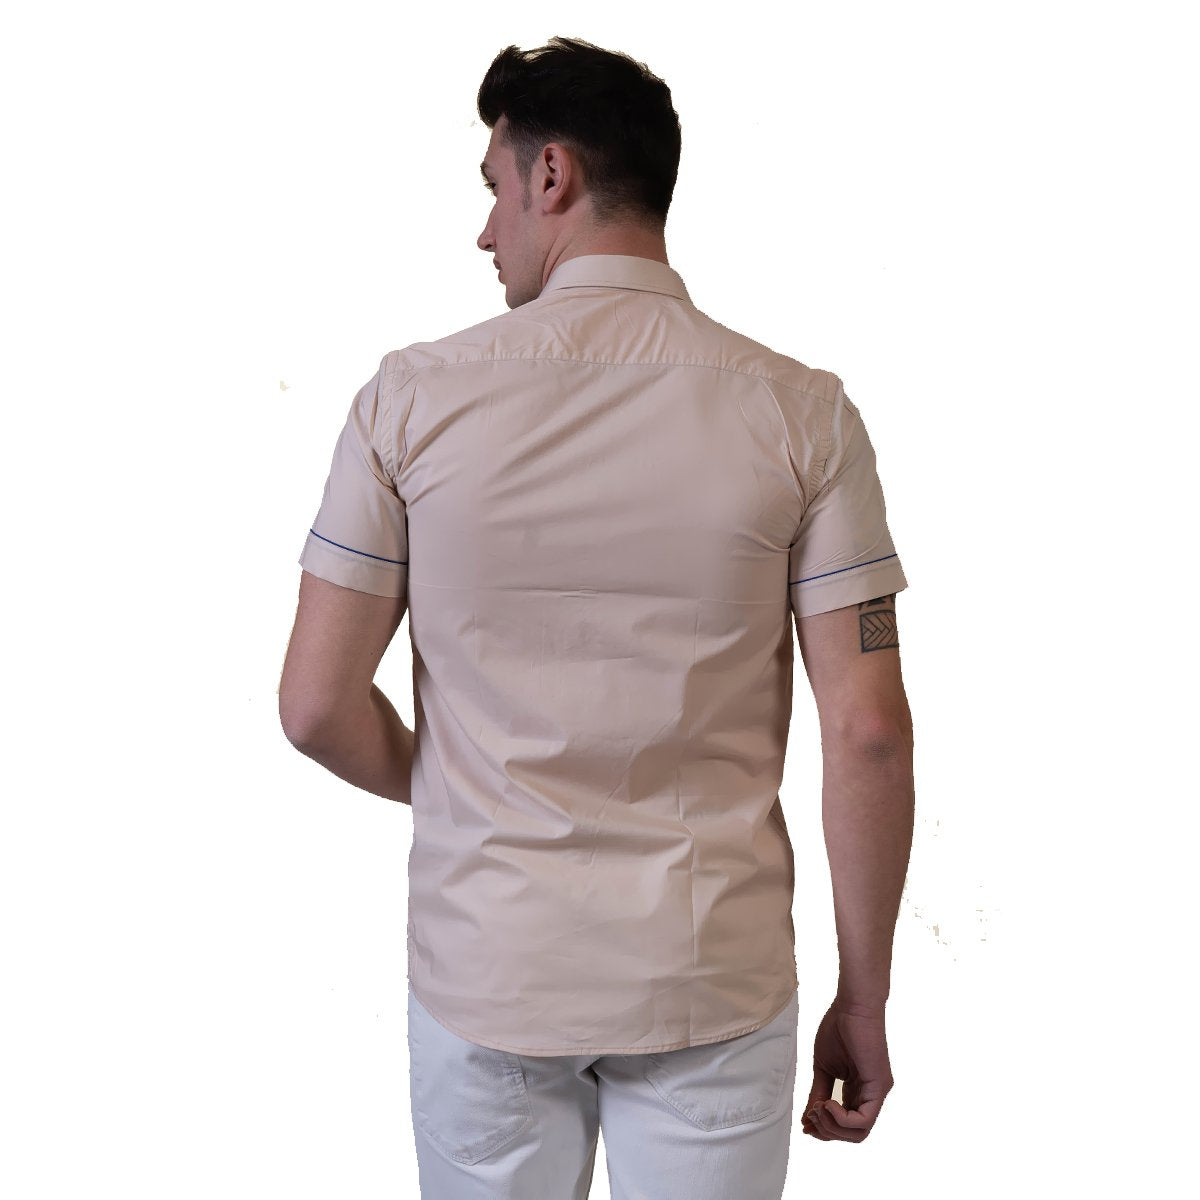 Picture of a Premium Men's Short Sleeve Button Up Shirt in Orange back view